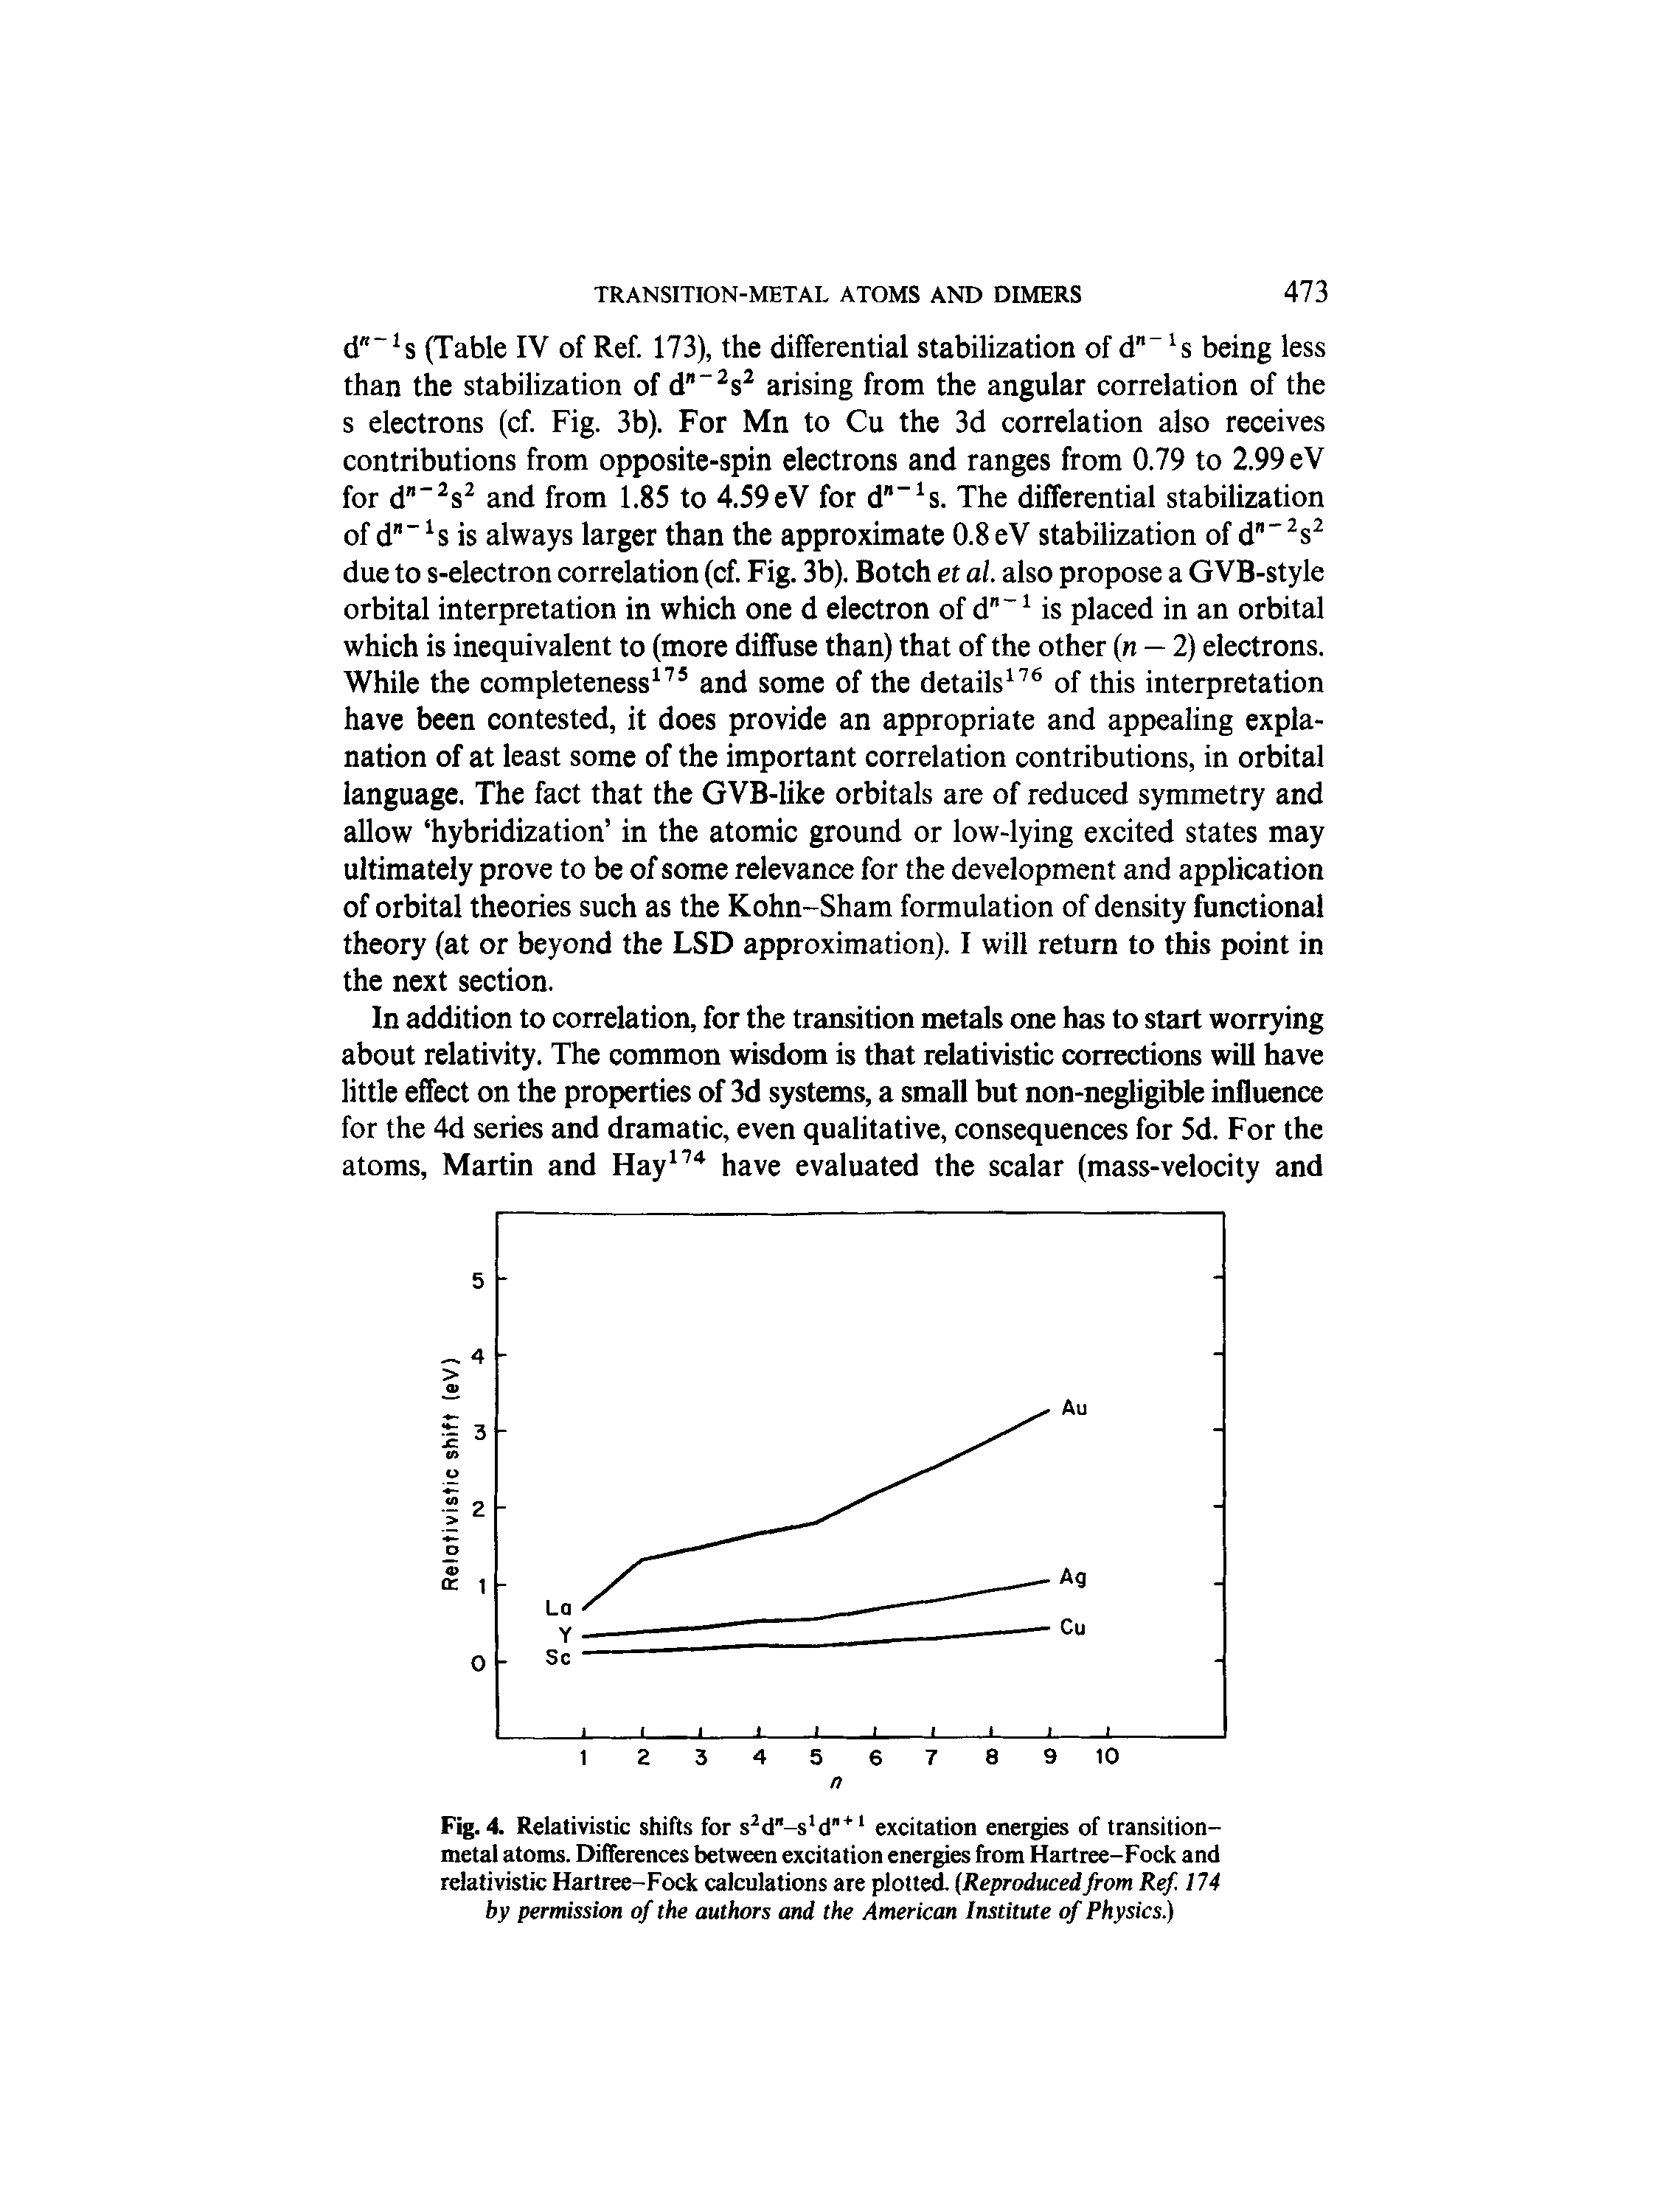 Fig. 4. Relativistic shifts for s d"-s d" excitation energies of transition-metal atoms. Differences between excitation energies from Hartree-Fock and relativistic Hartree-Fock calculations are plotted. (Reproducedfrom Ref 174 by permission of the authors and the American Institute of Physics.)...